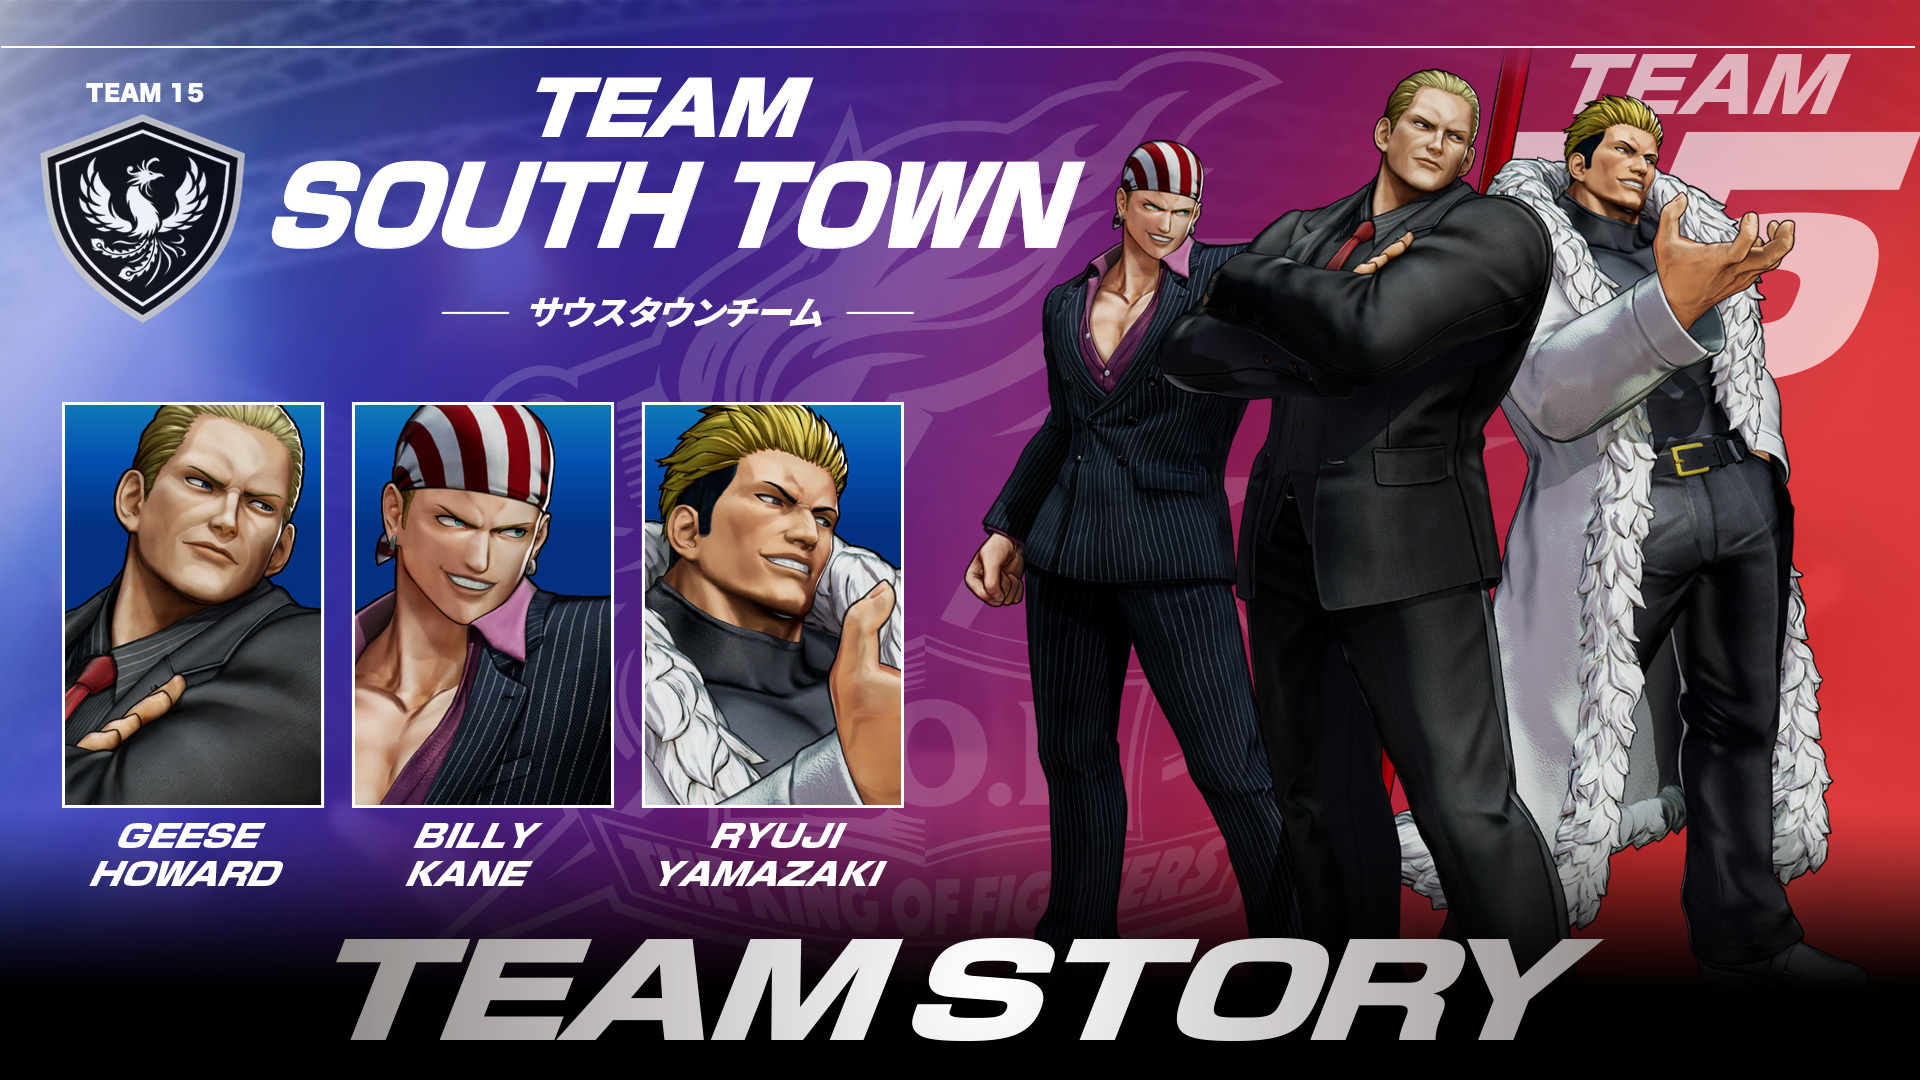 THE BOYS ARE BACK IN TOWN! Team SOUTH TOWN joins KOF XV on May